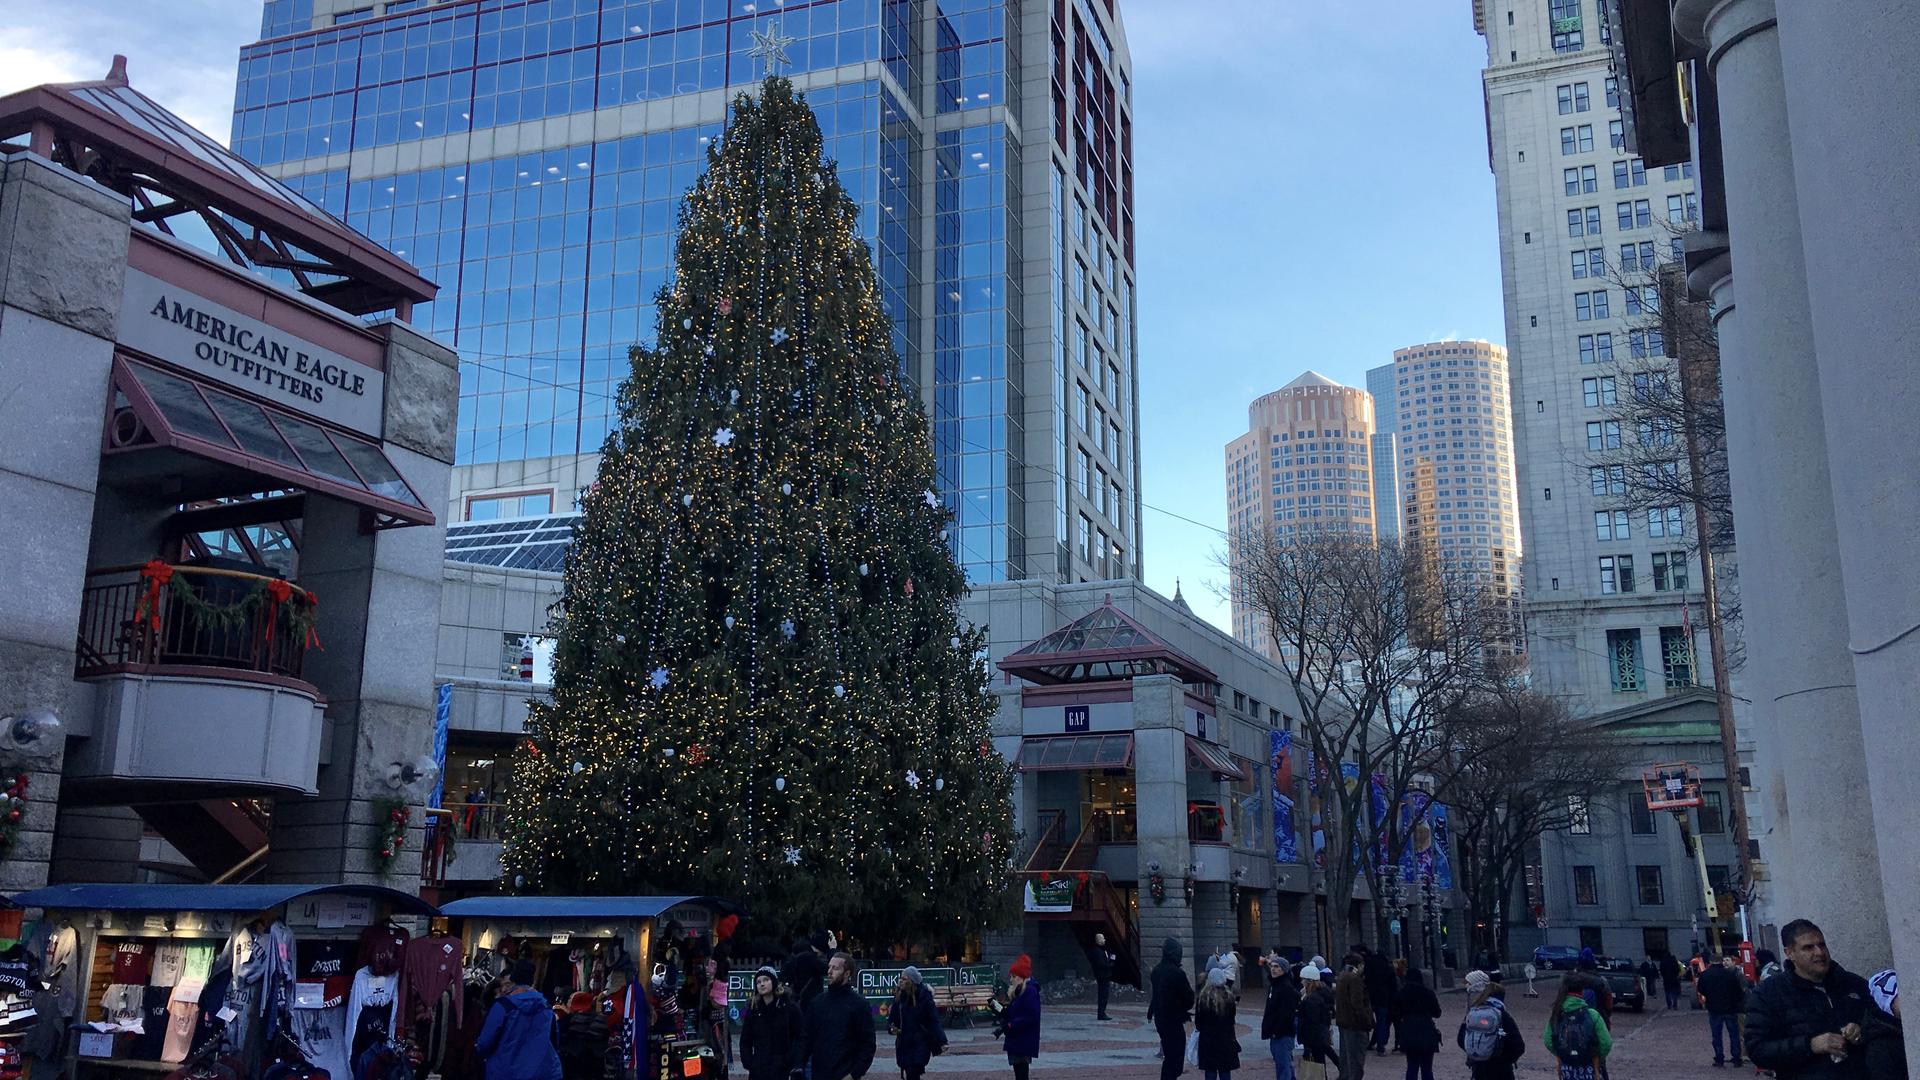 The Christmas tree at Faneuil Hall marketplace in downtown Boston is from Long Island, New York. But is it a religious symbol? Many people say, not really.  